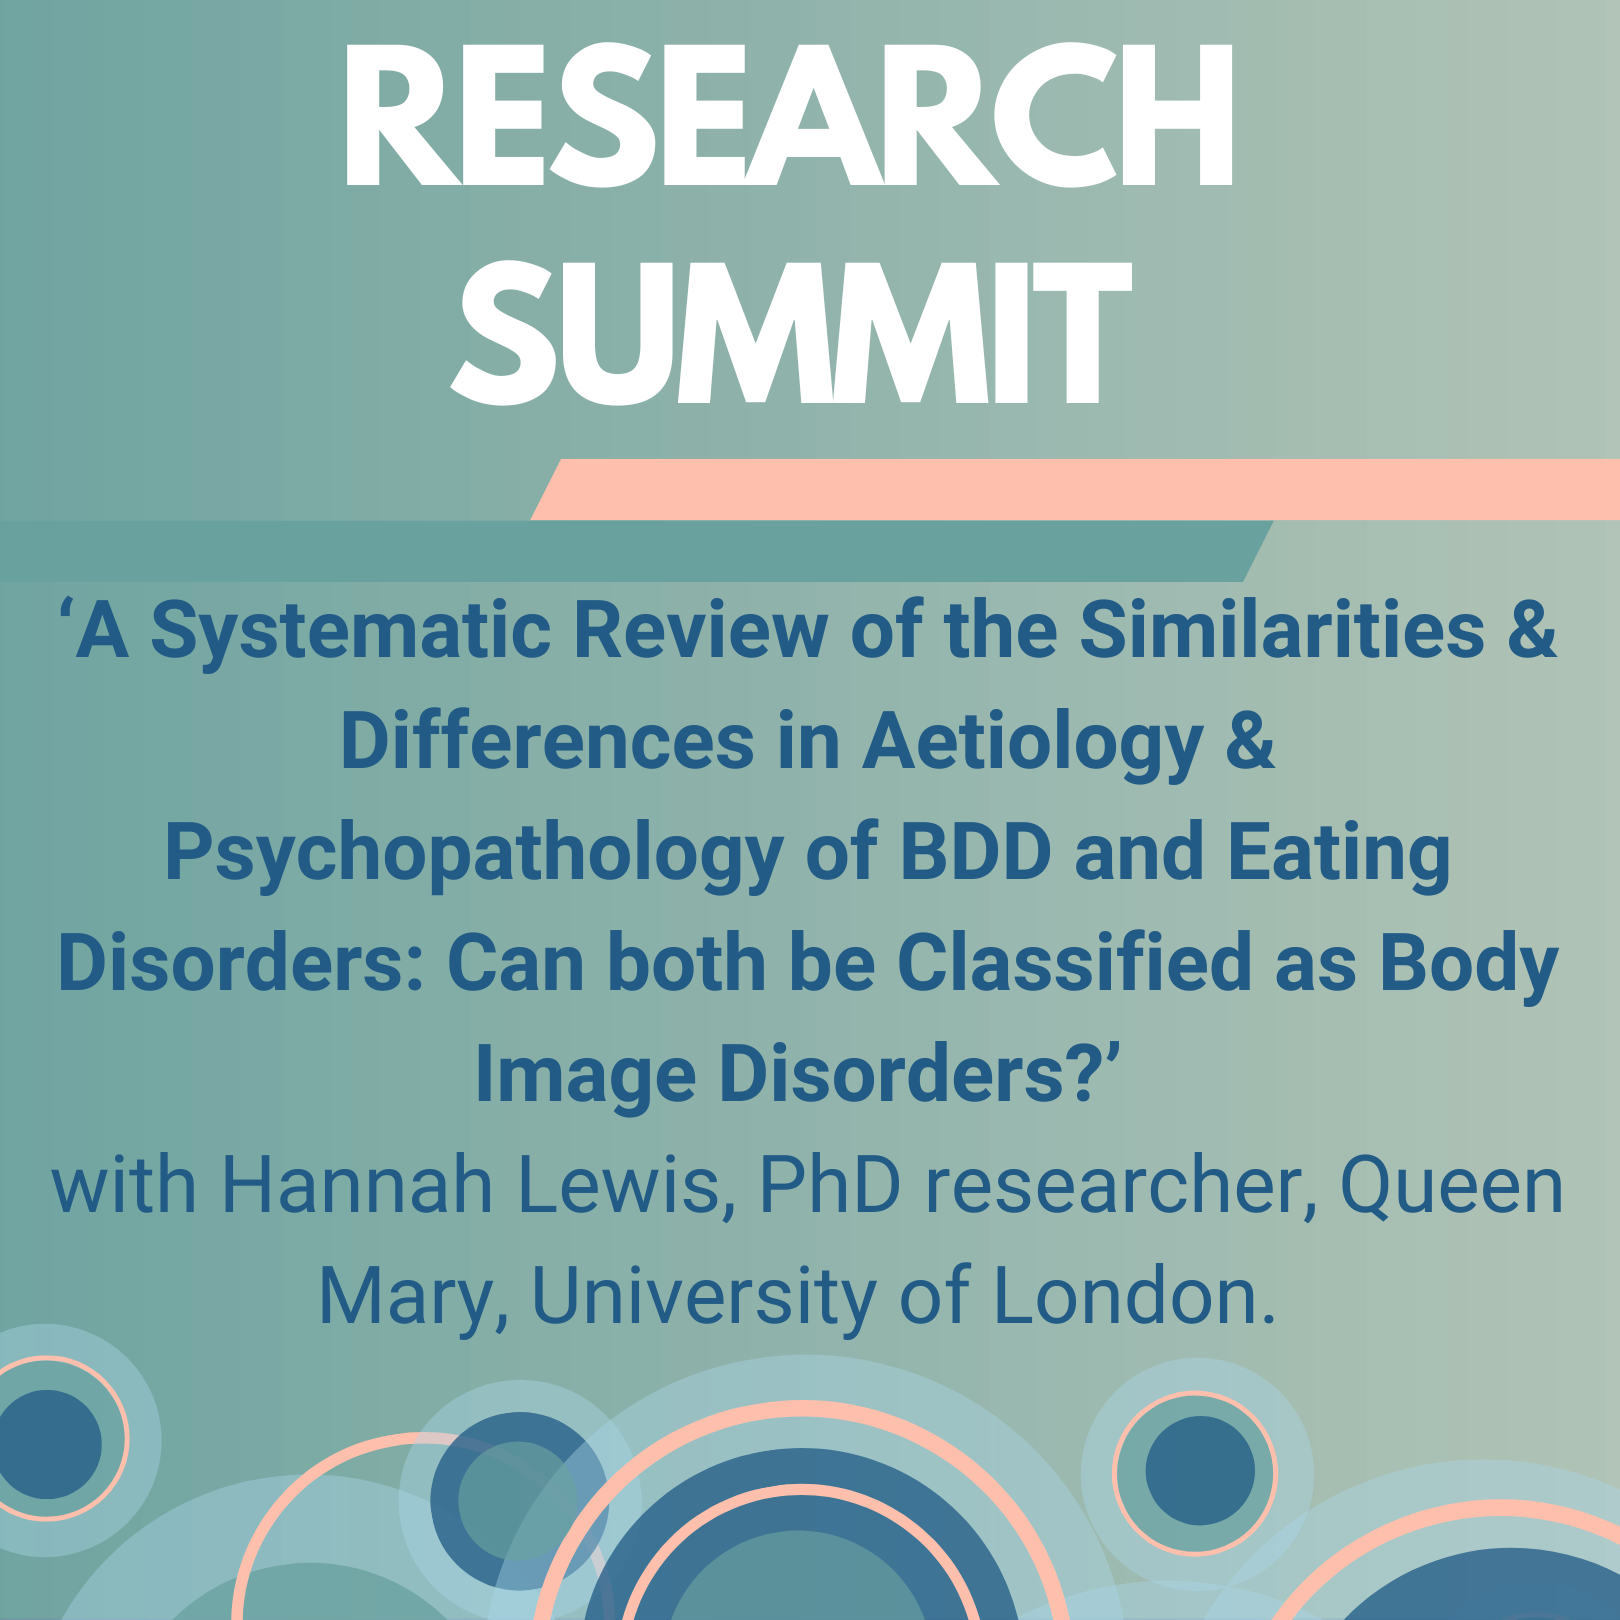 ‘A systematic review of the similarities & differences in BDD & eating disorders…